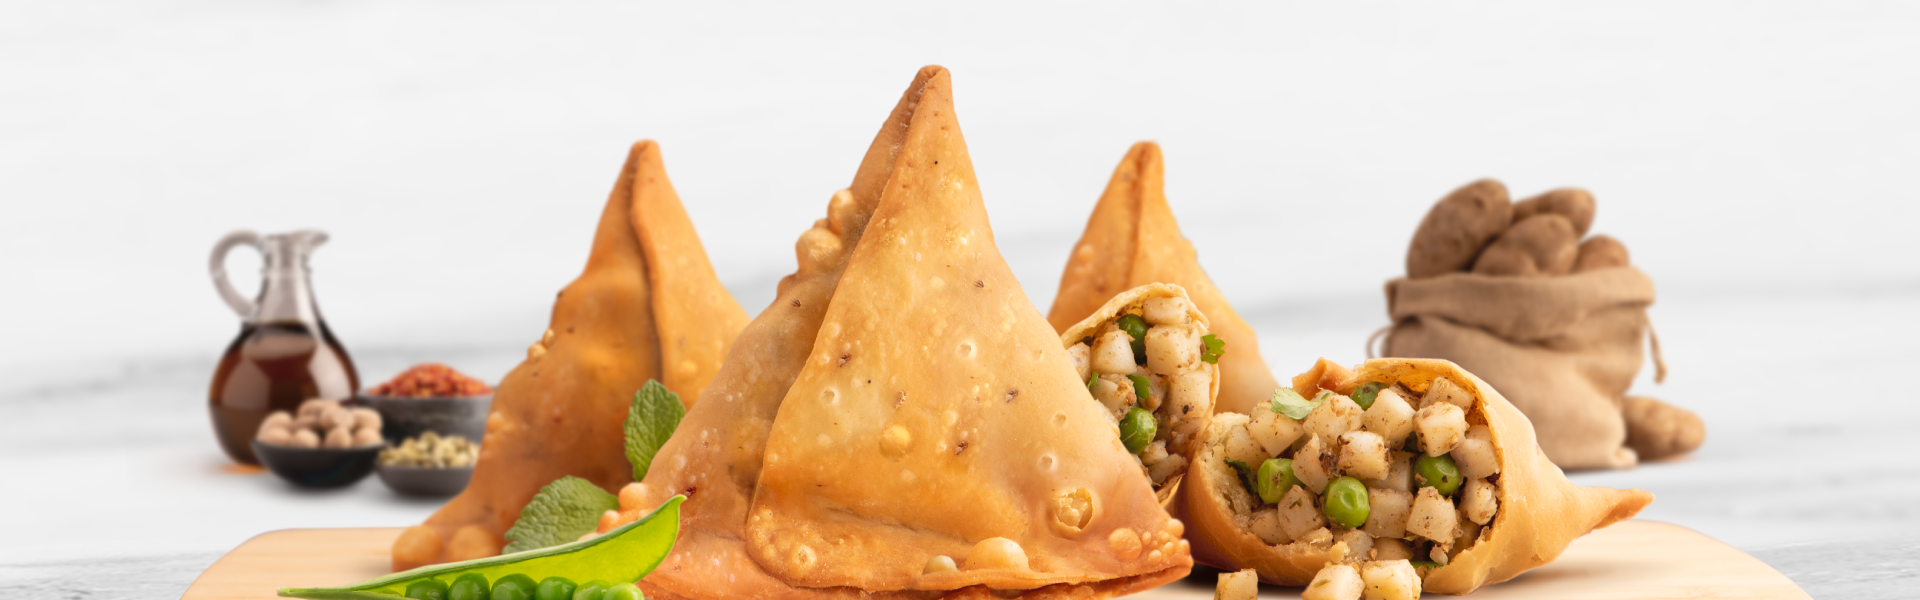 It's game time! Let's see if you can catch THE BEST - Brar's Samosa in the  triangle. Take a screenshot & share with us in the comment section  below🙂, By Brar's